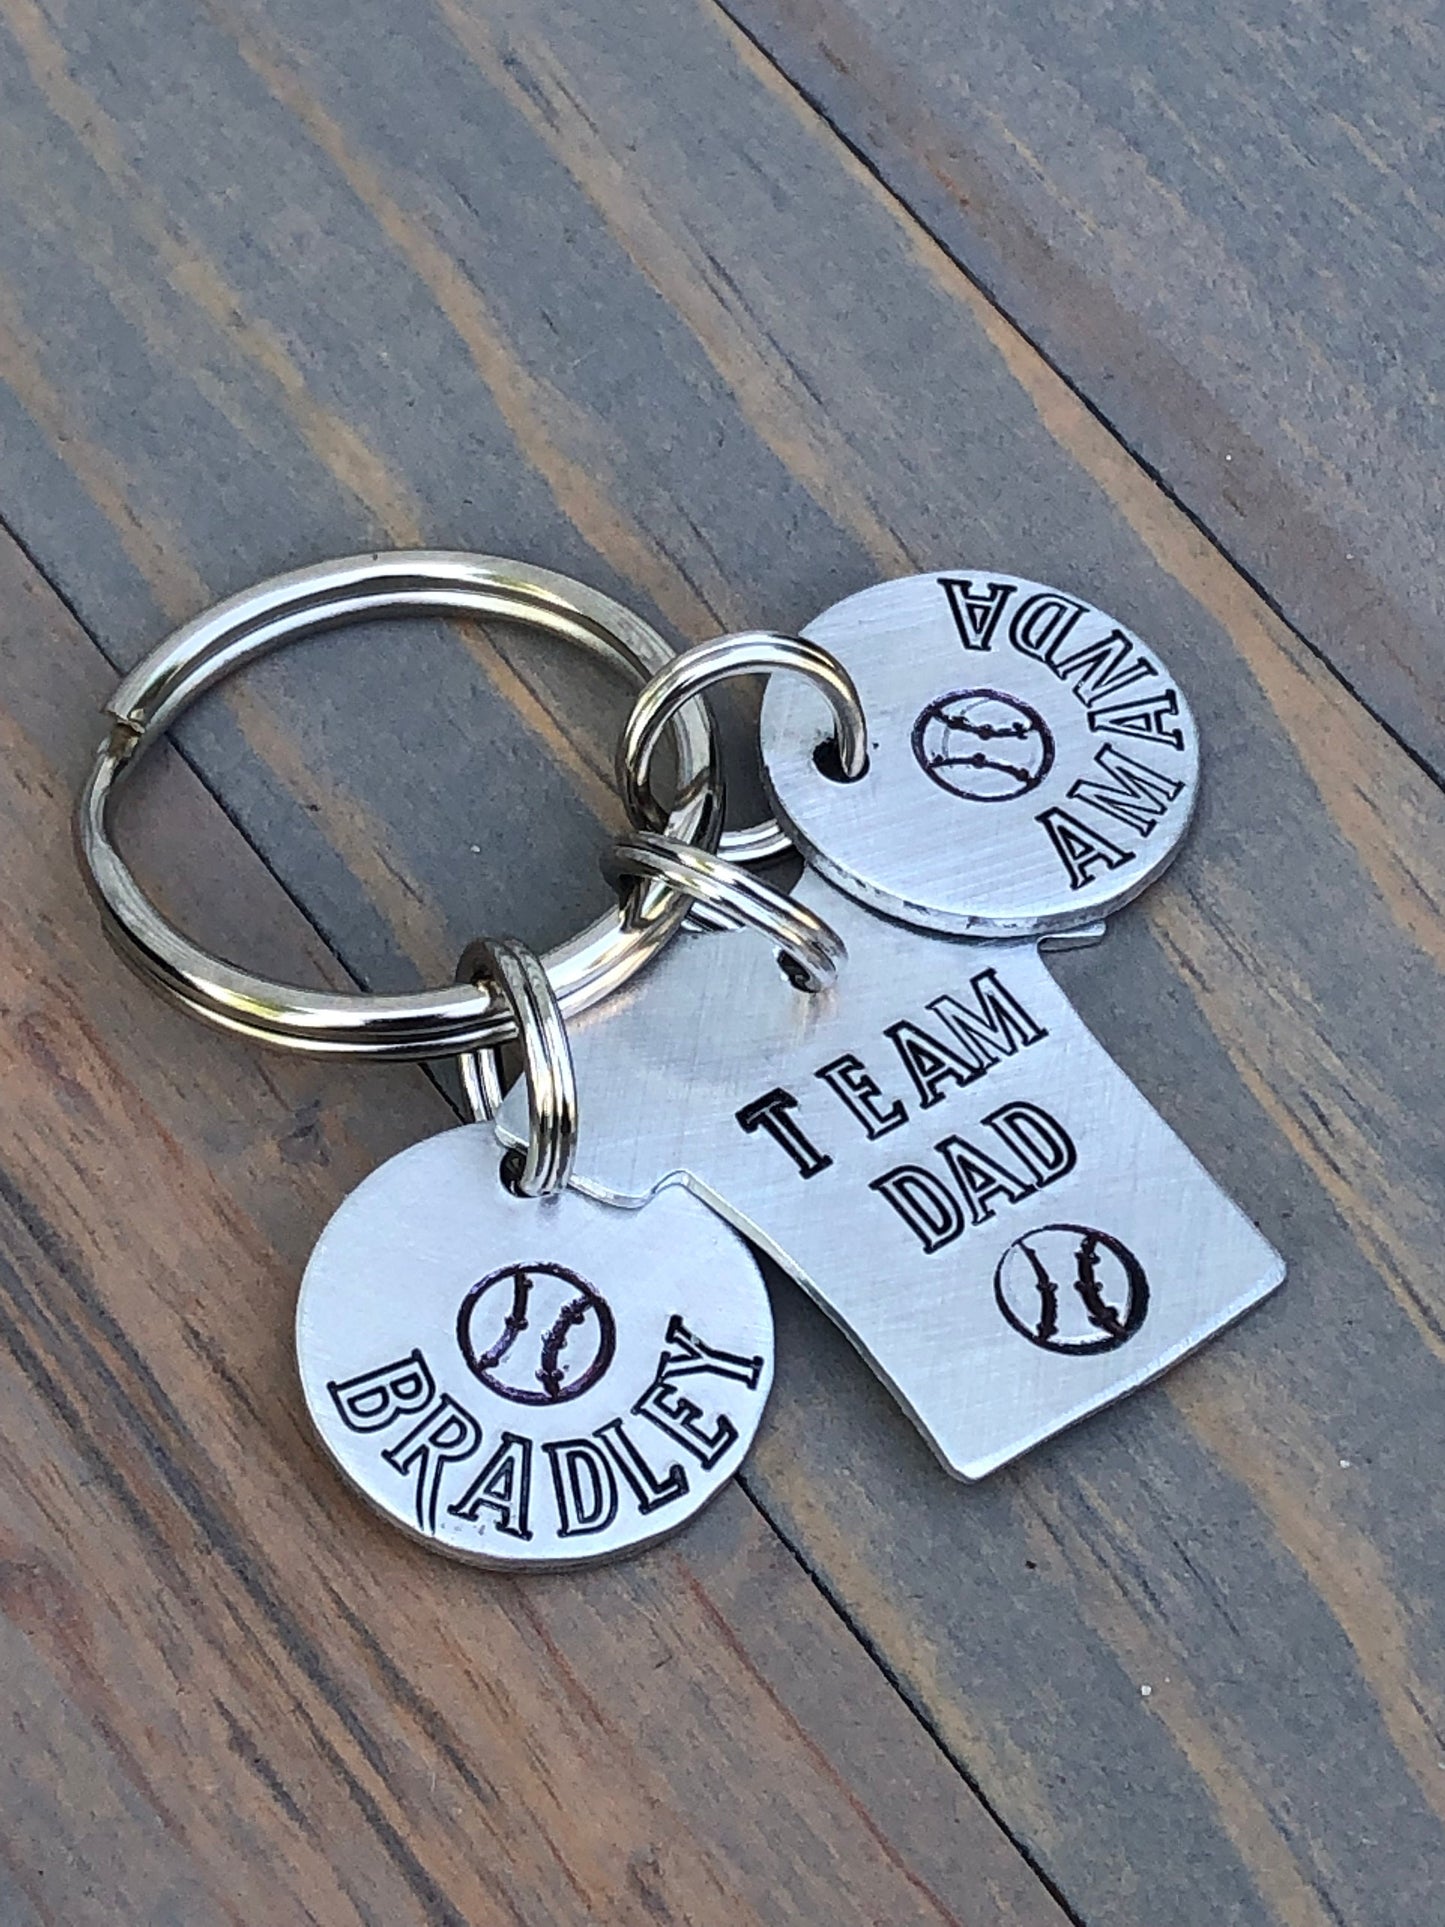 Team Dad Keychain for Father-Sports Team Keychain-Father's Day Gift- Team Grampa-Personalized Gift for Dad-Basketball-Baseball-Soccer-Hockey